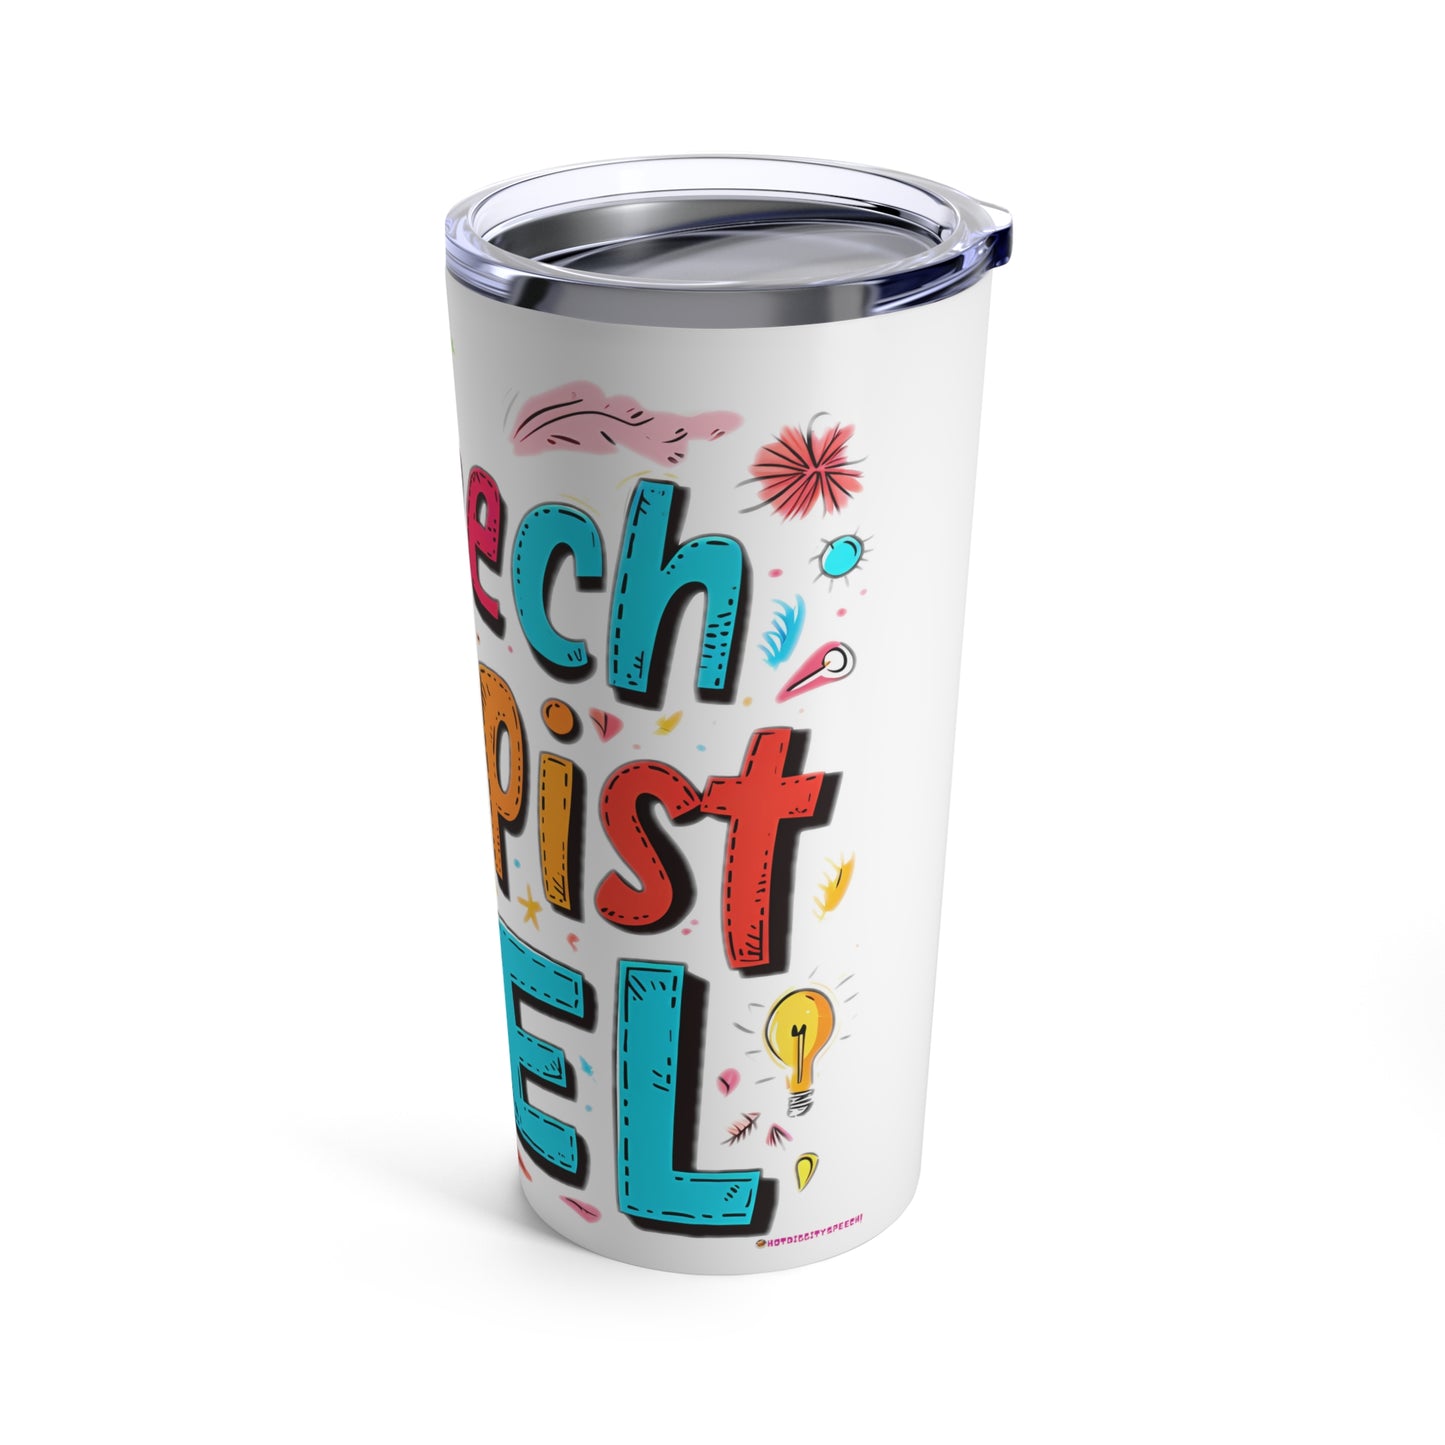 "Speech Therapist Fuel" 20oz Stainless Steel Tumbler - Bright & Playful Design with Clear Lid